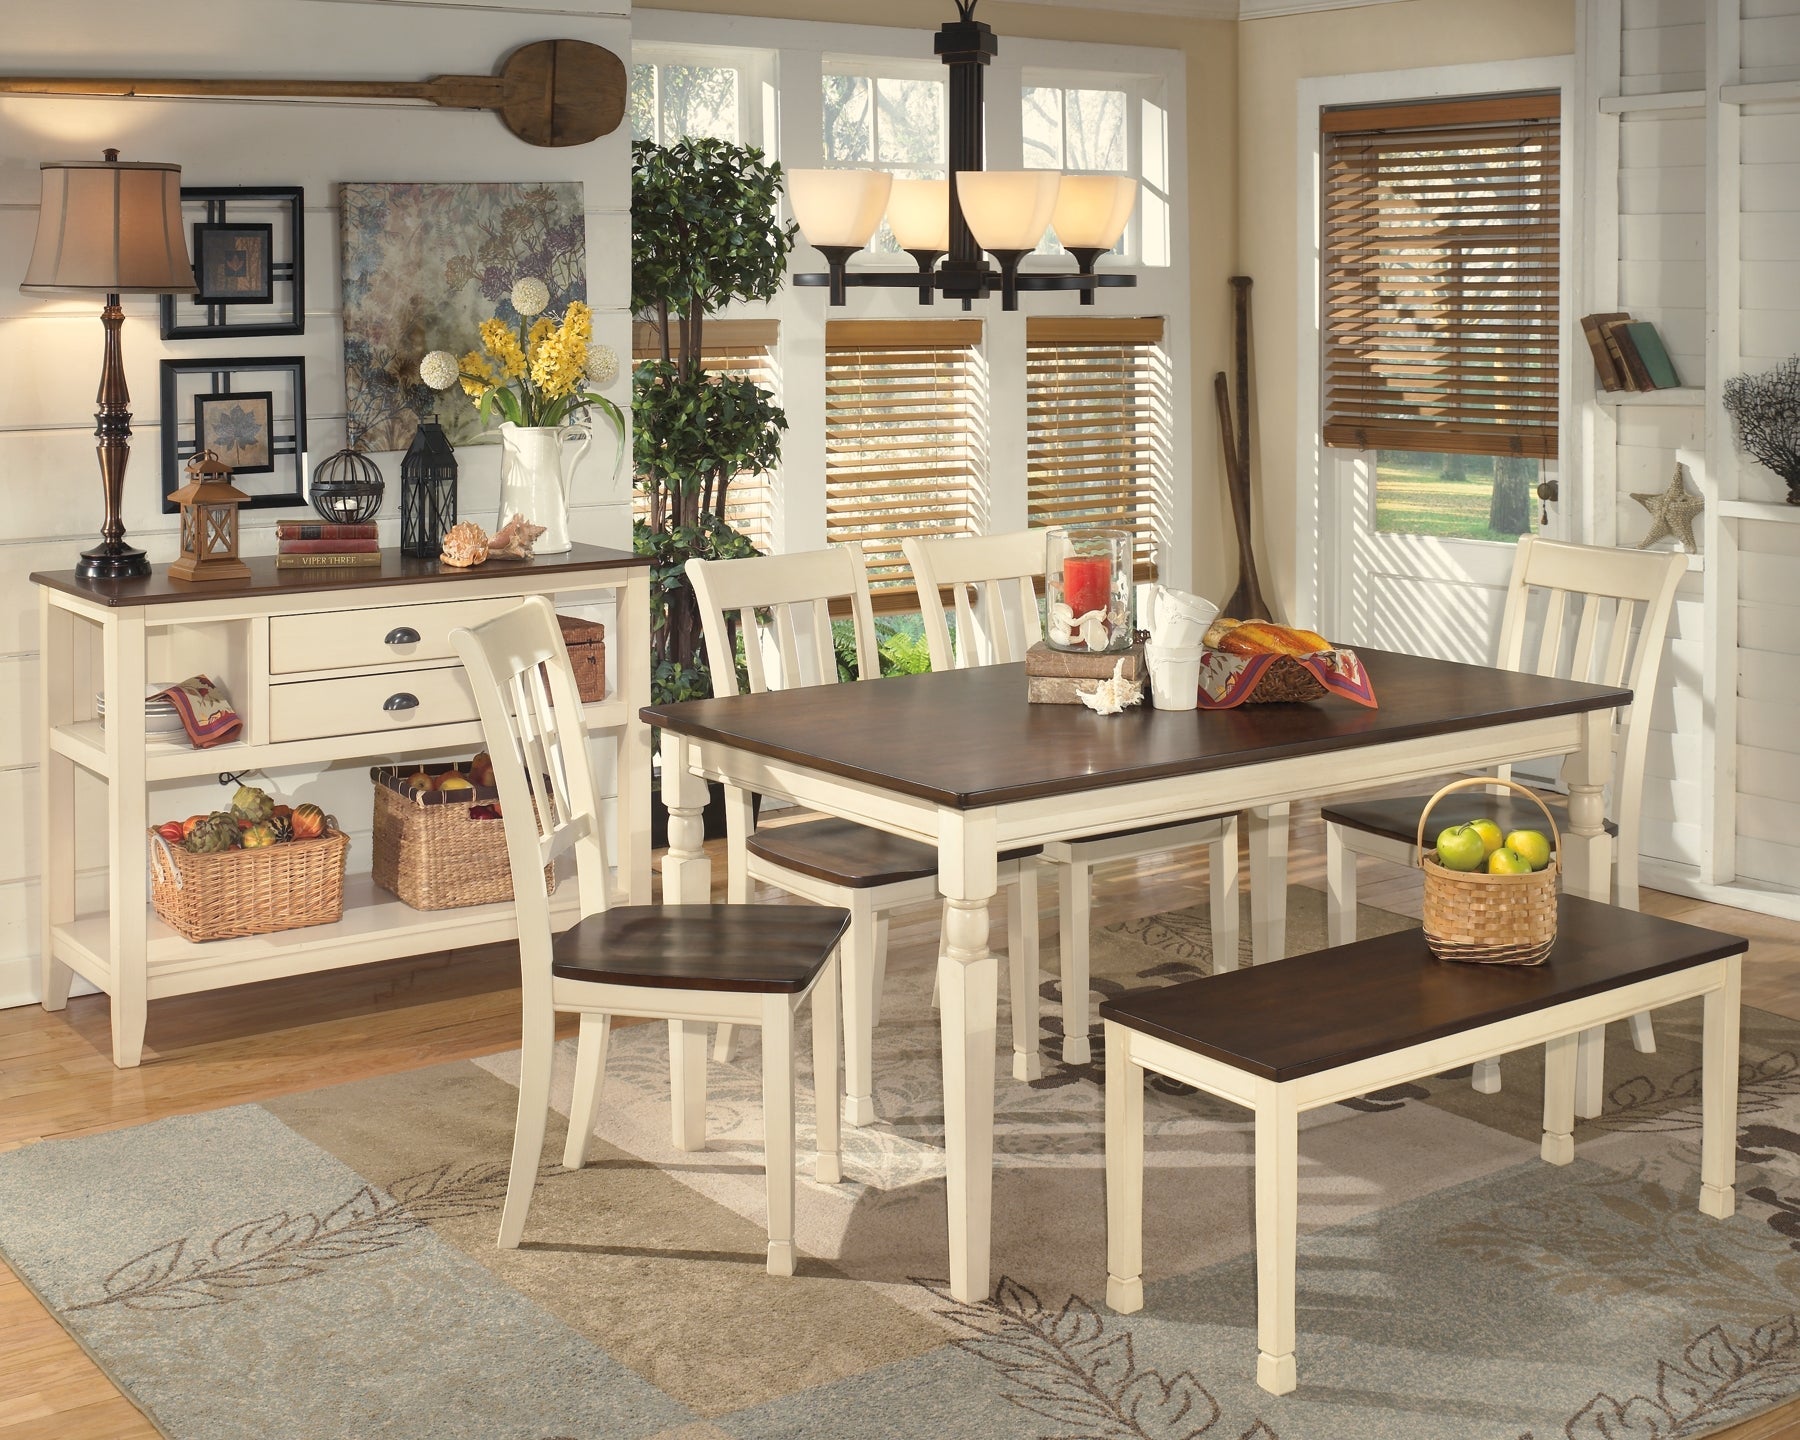 Whitesburg Dining Table and 4 Chairs and Bench with Storage at Walker Mattress and Furniture Locations in Cedar Park and Belton TX.